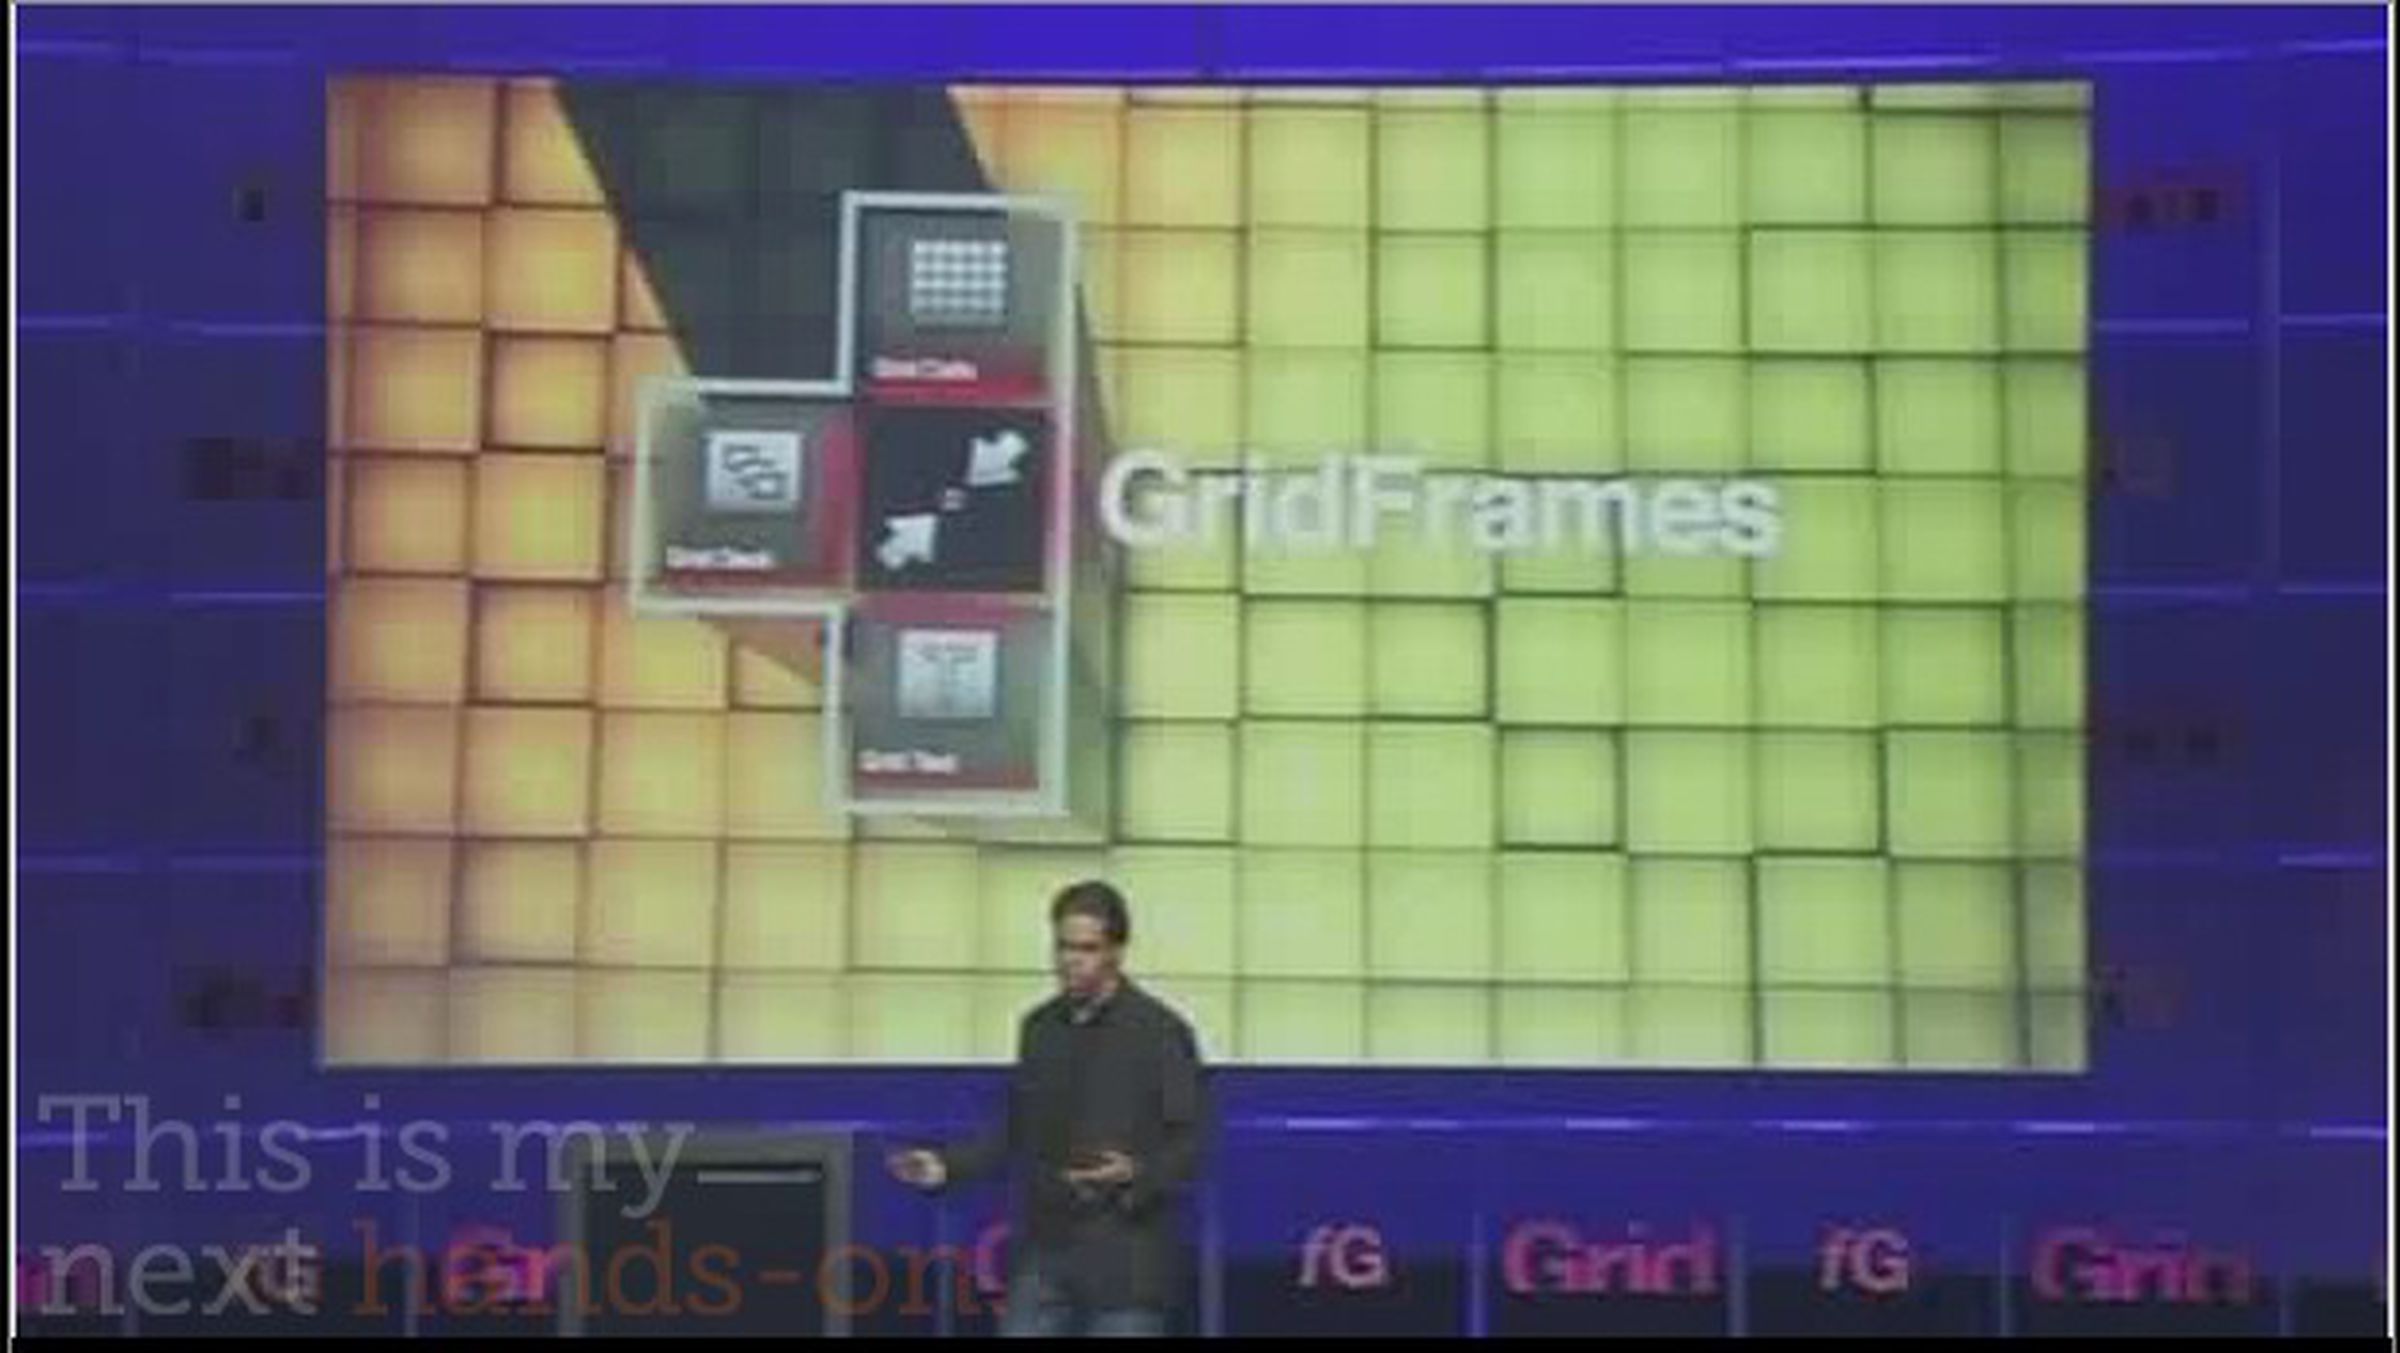 Fusion Garage Grid 10 tablet: specs, pricing, and release date